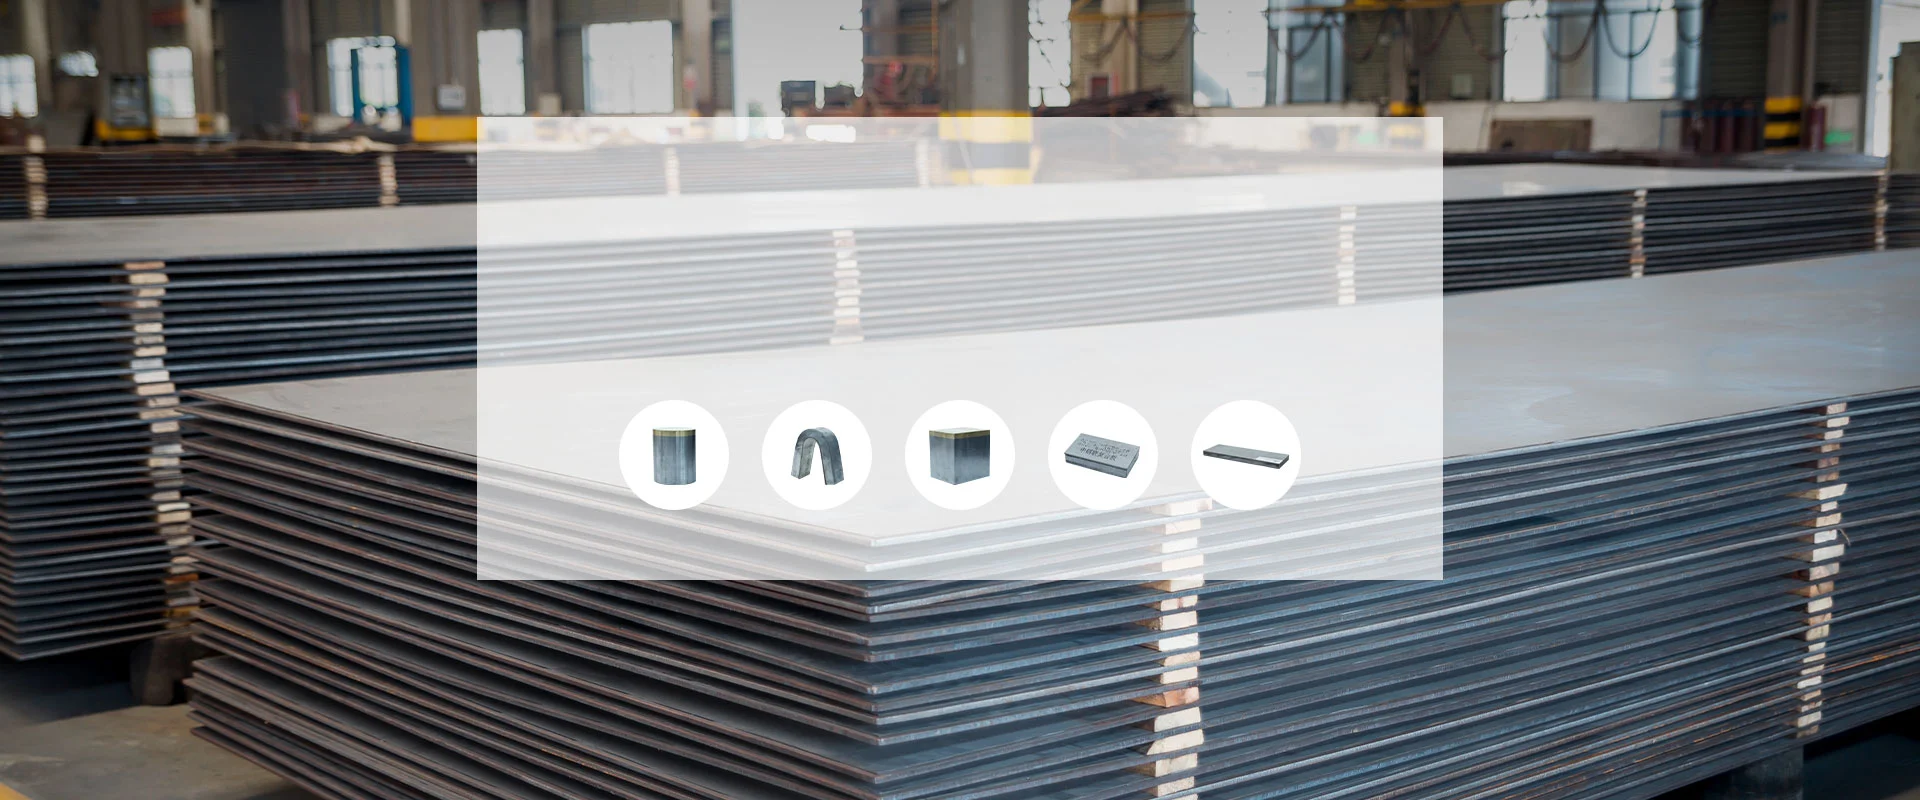 Superior Strength and Durability: Discover Our Clad Plates Product Line